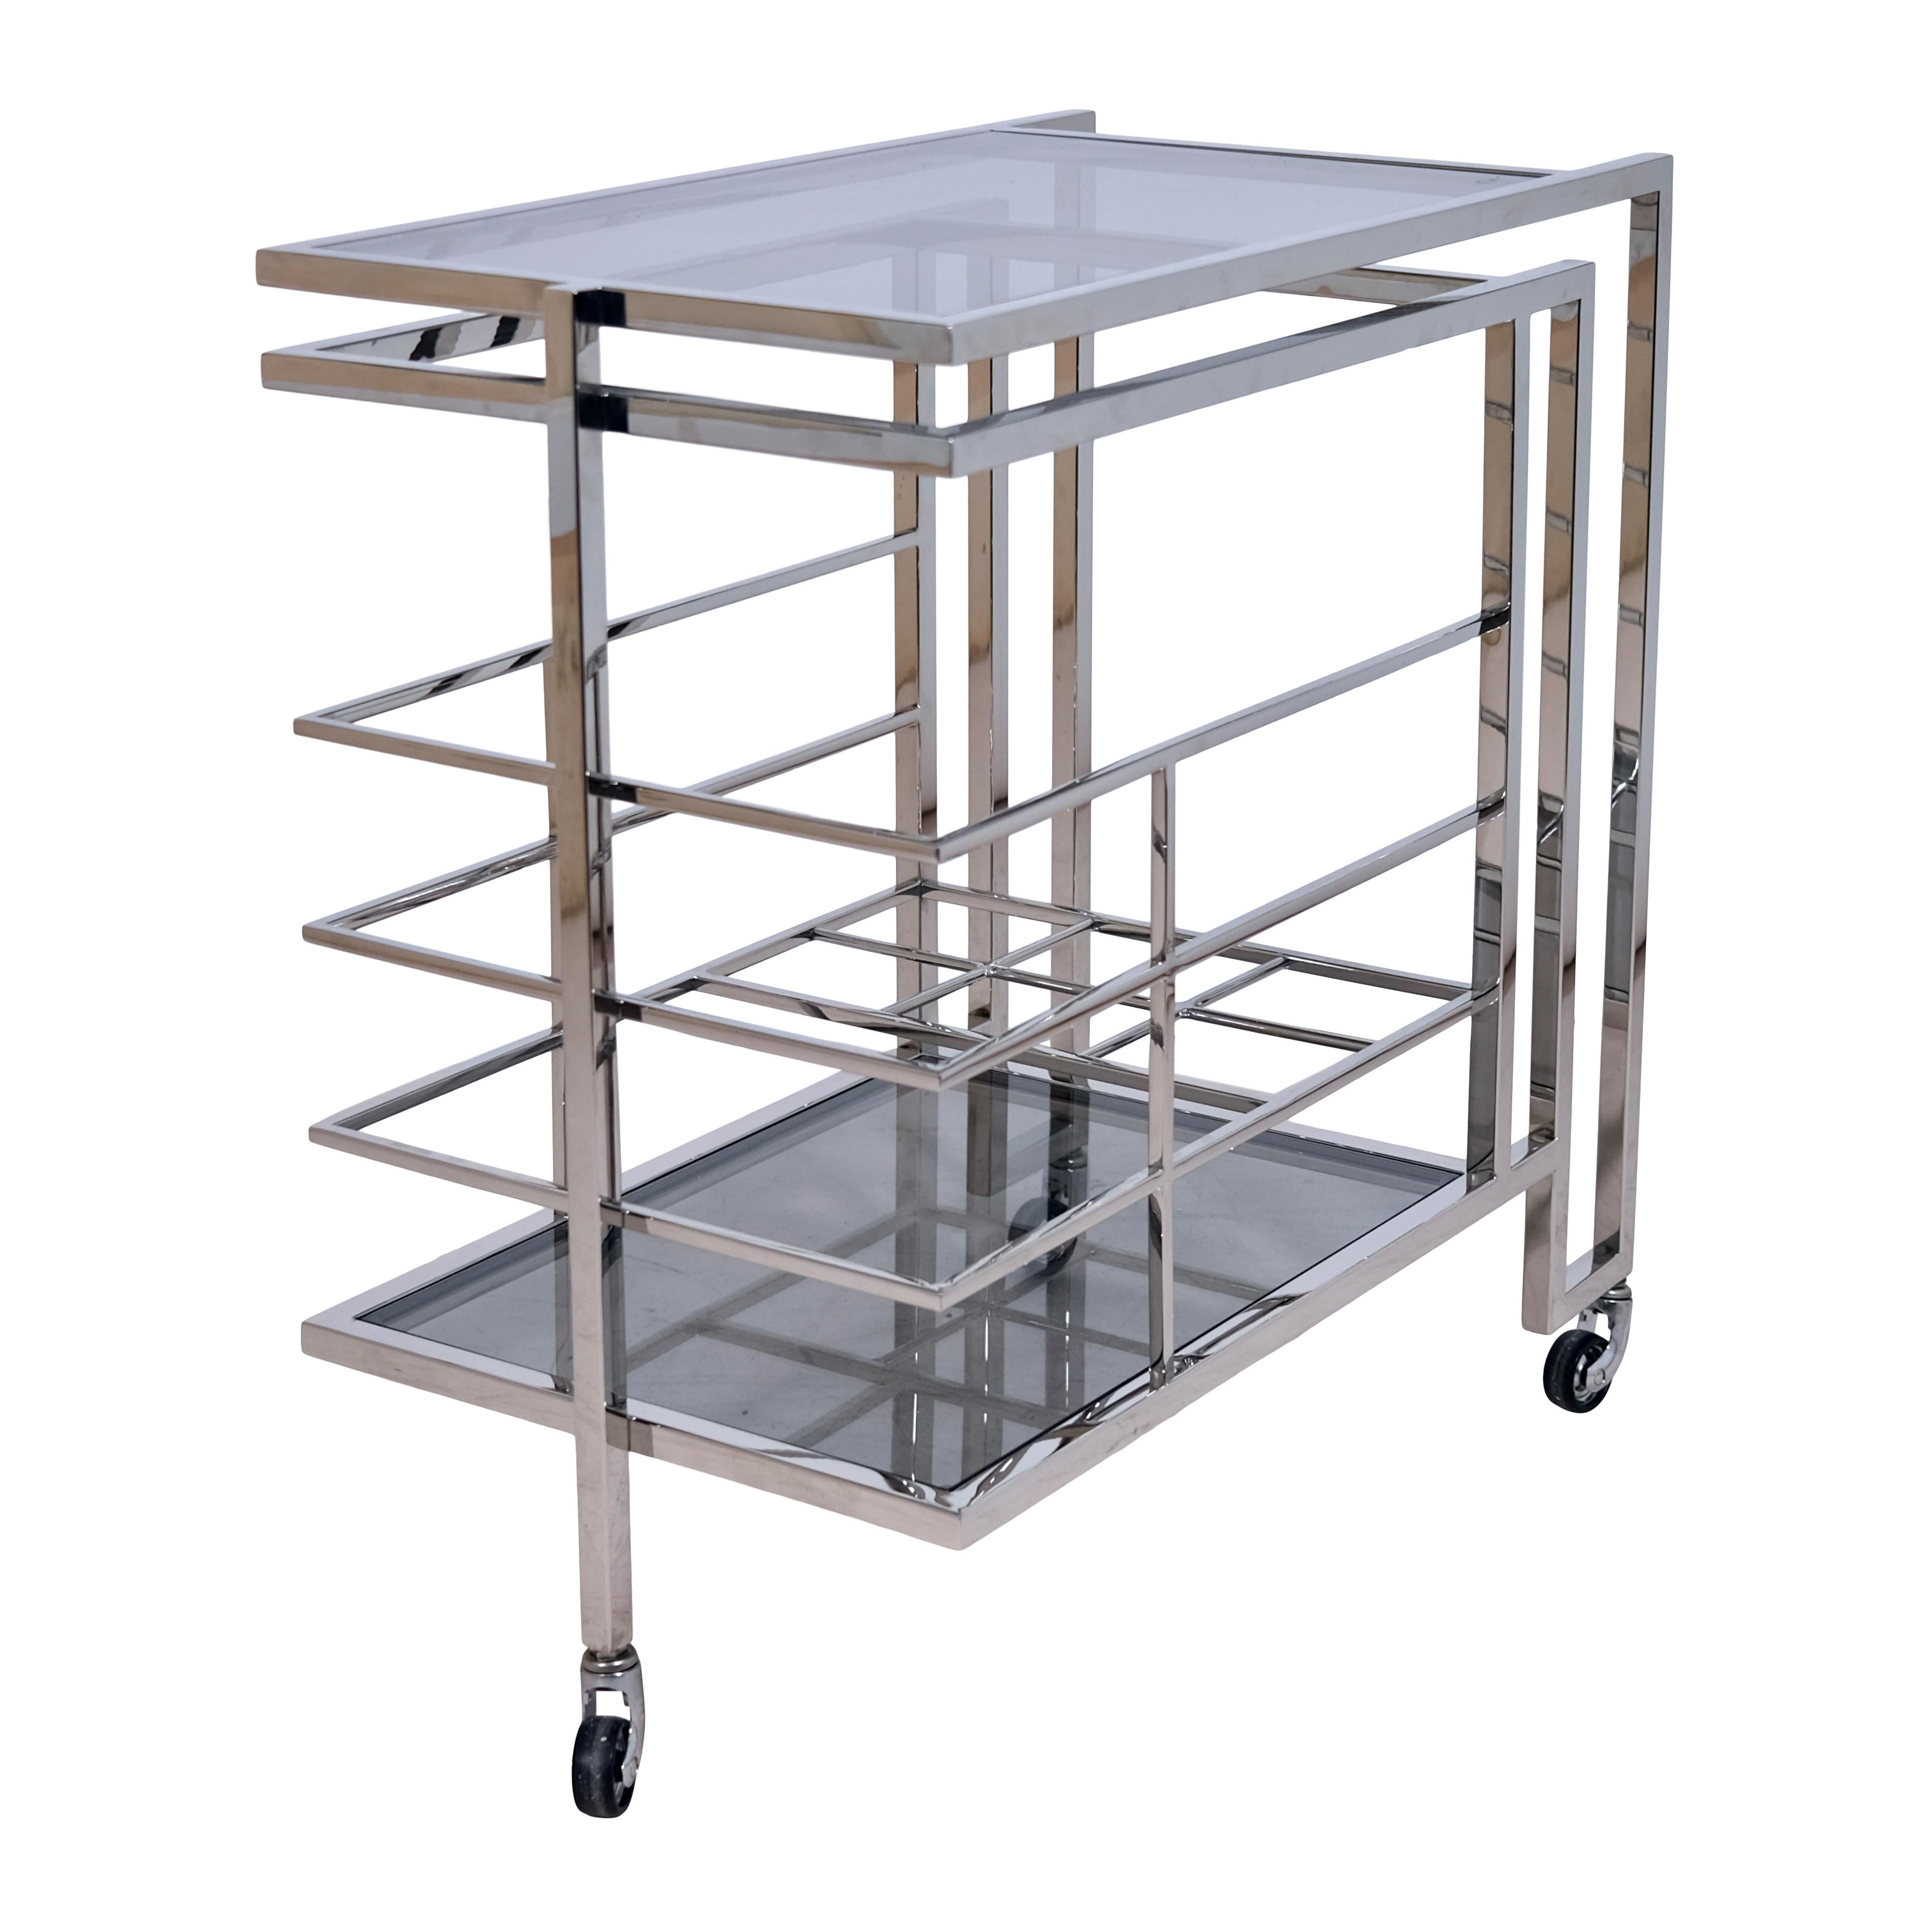 This modern bar cart, made of nickel-plated brass square tubes, is a perfect addition to your home, offering mobility and flexibility in your living room with its three wheels.

The design is inspired by a strict modernist style in the spirit of Art